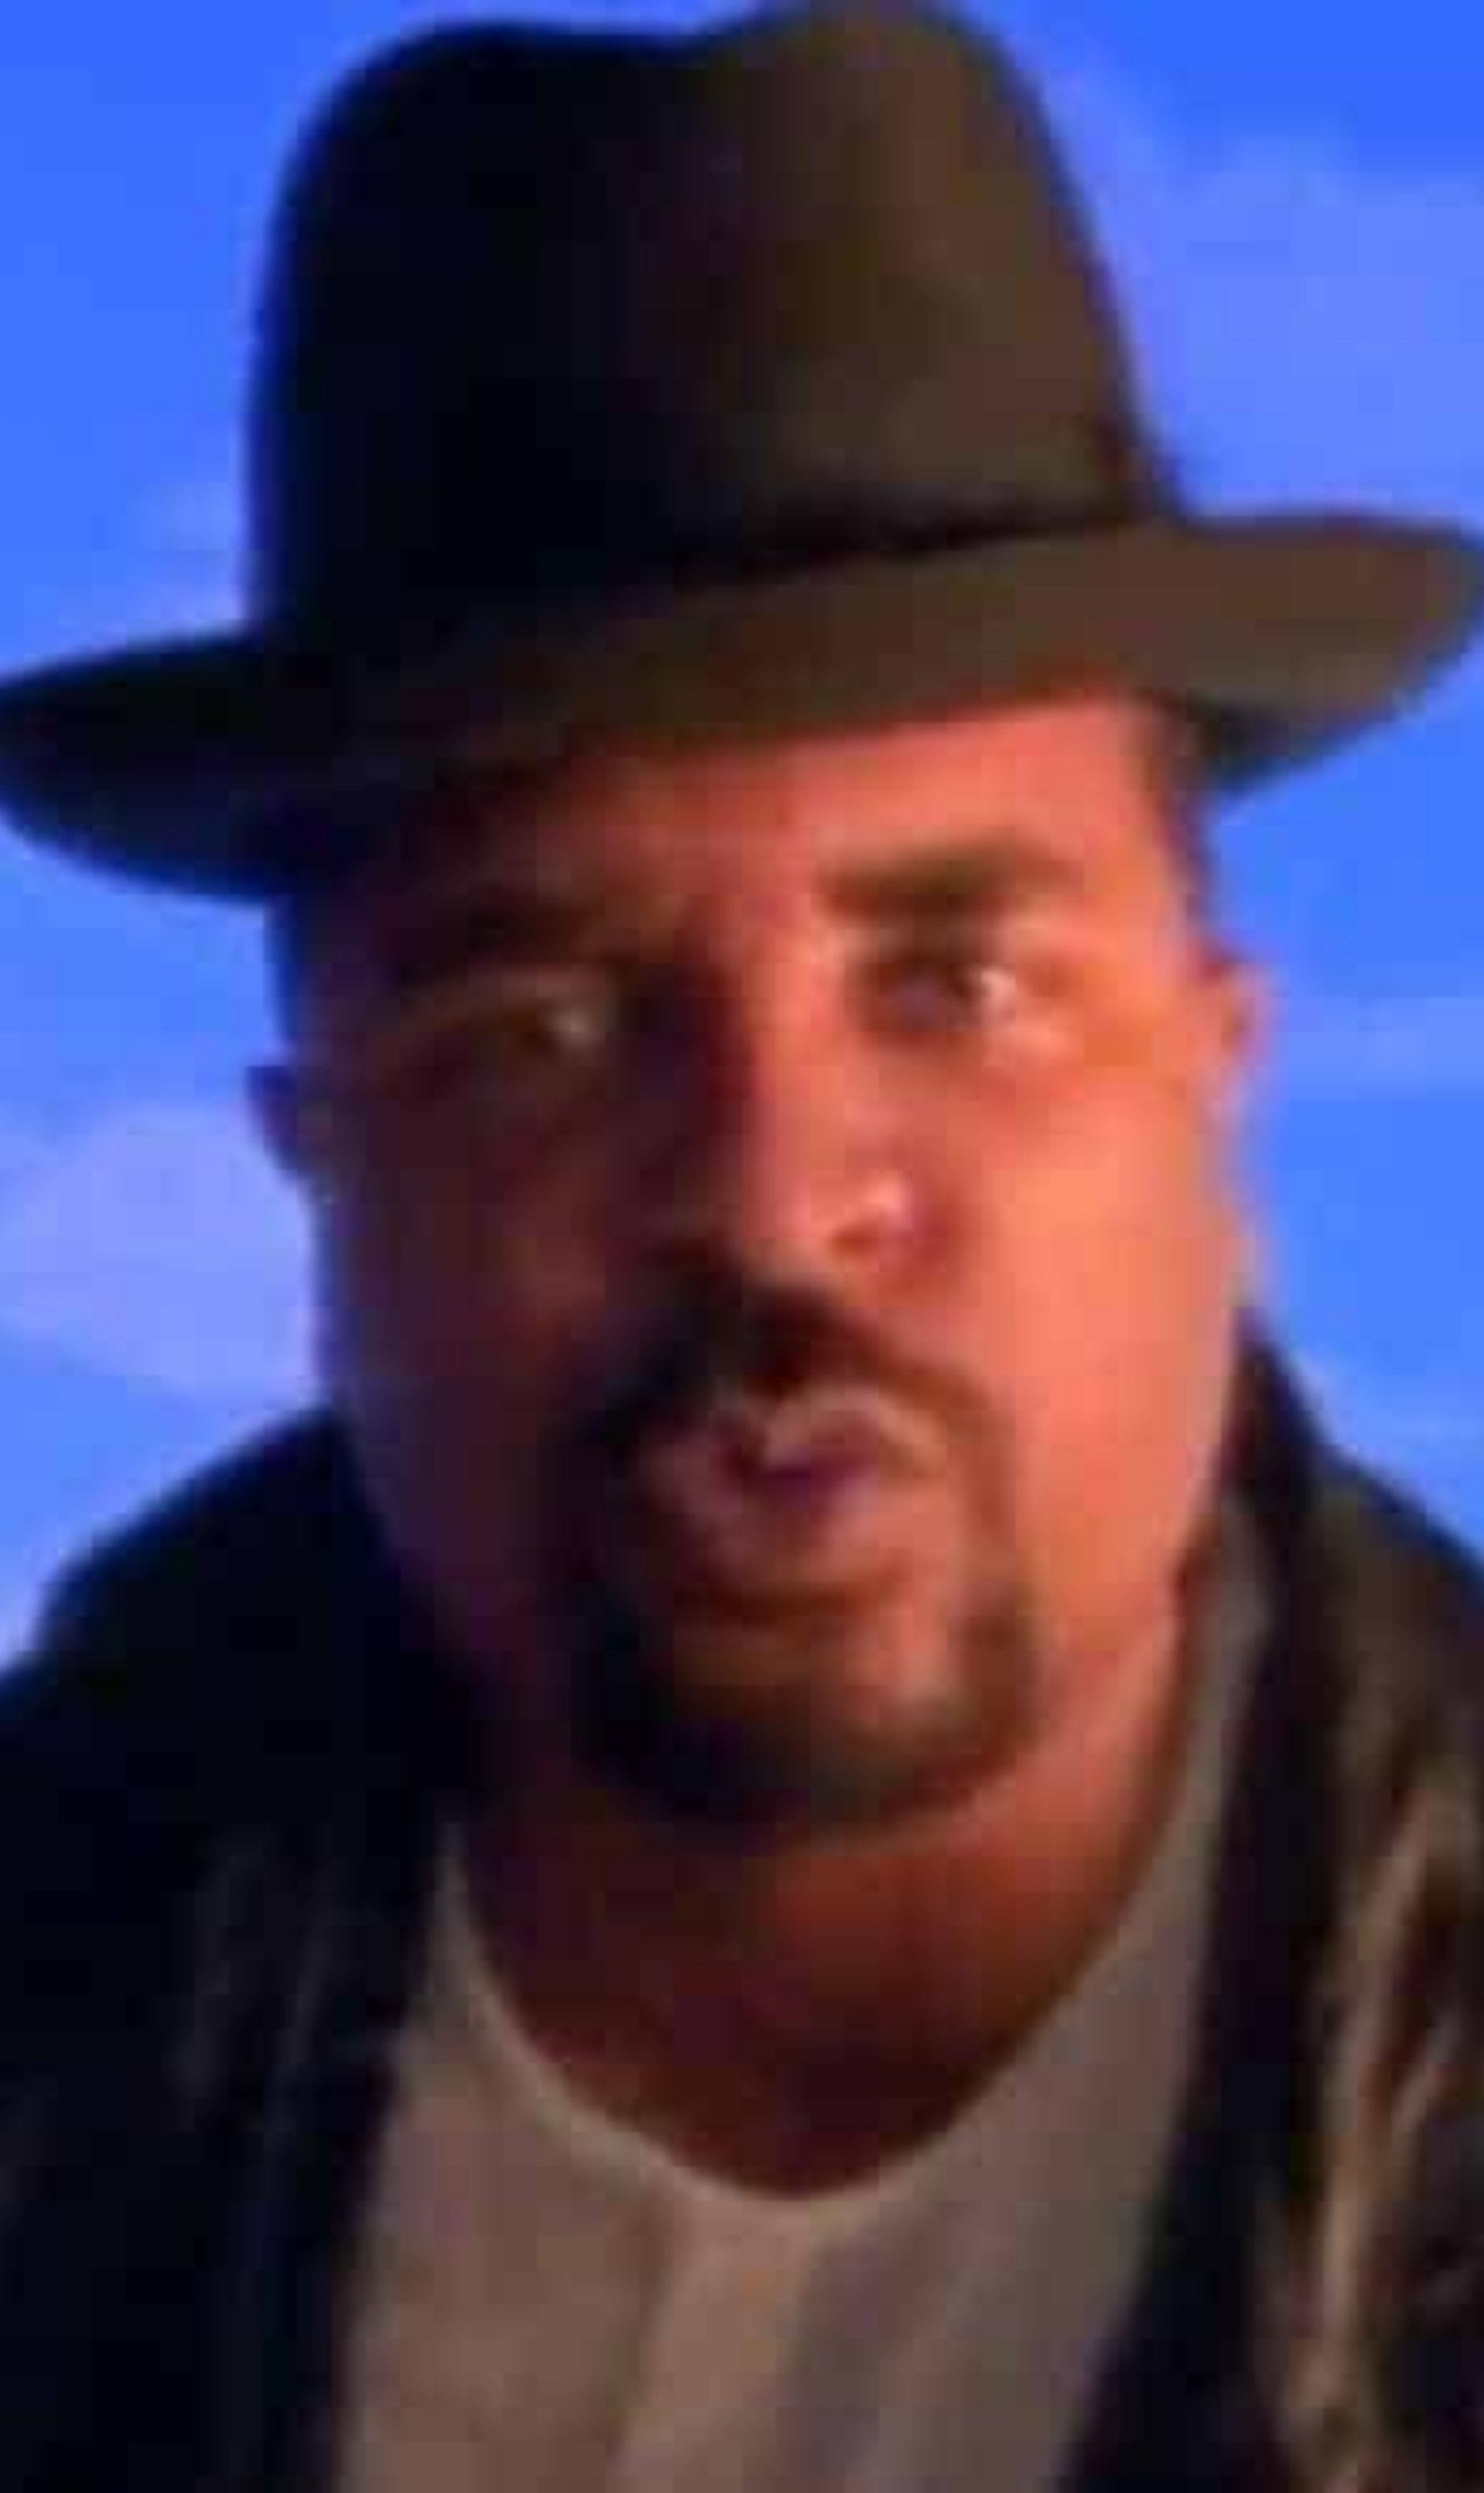 Sir Mix-a-Lot in his &quot;Baby Got Back&quot; music video